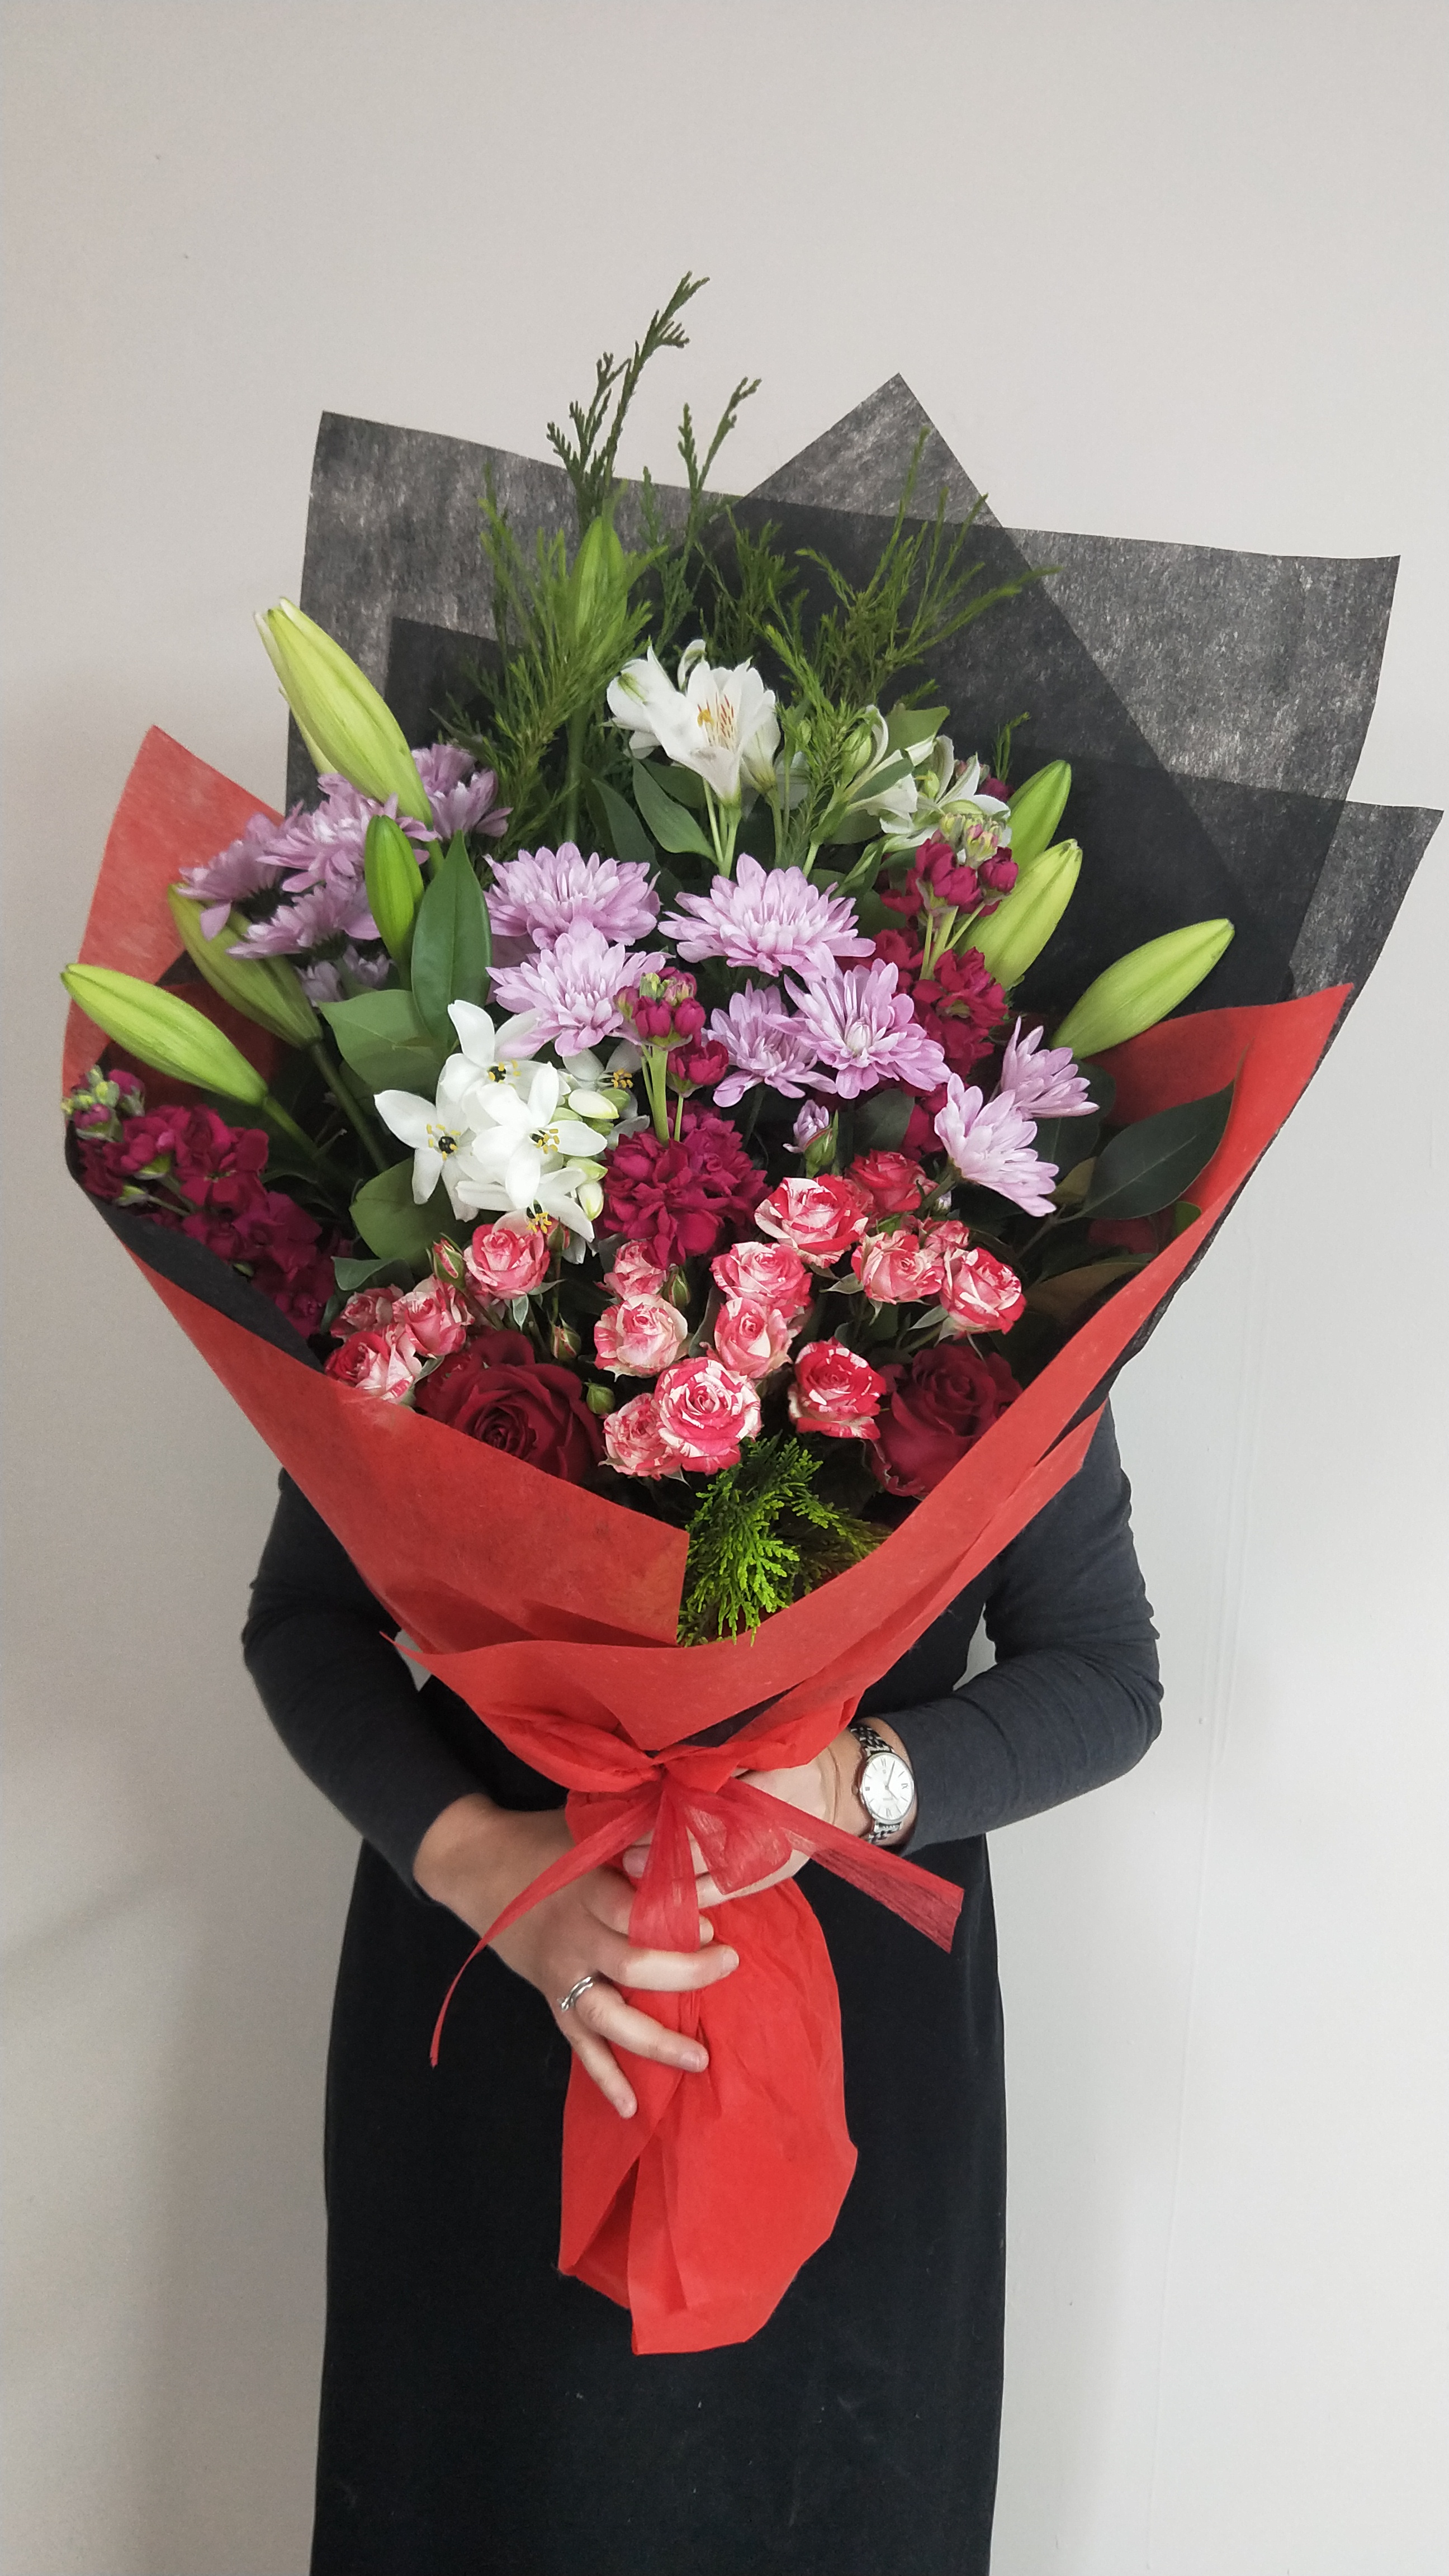 Extraordinary large size Roseberry bouquet makes an ideal gift for all loved ones.